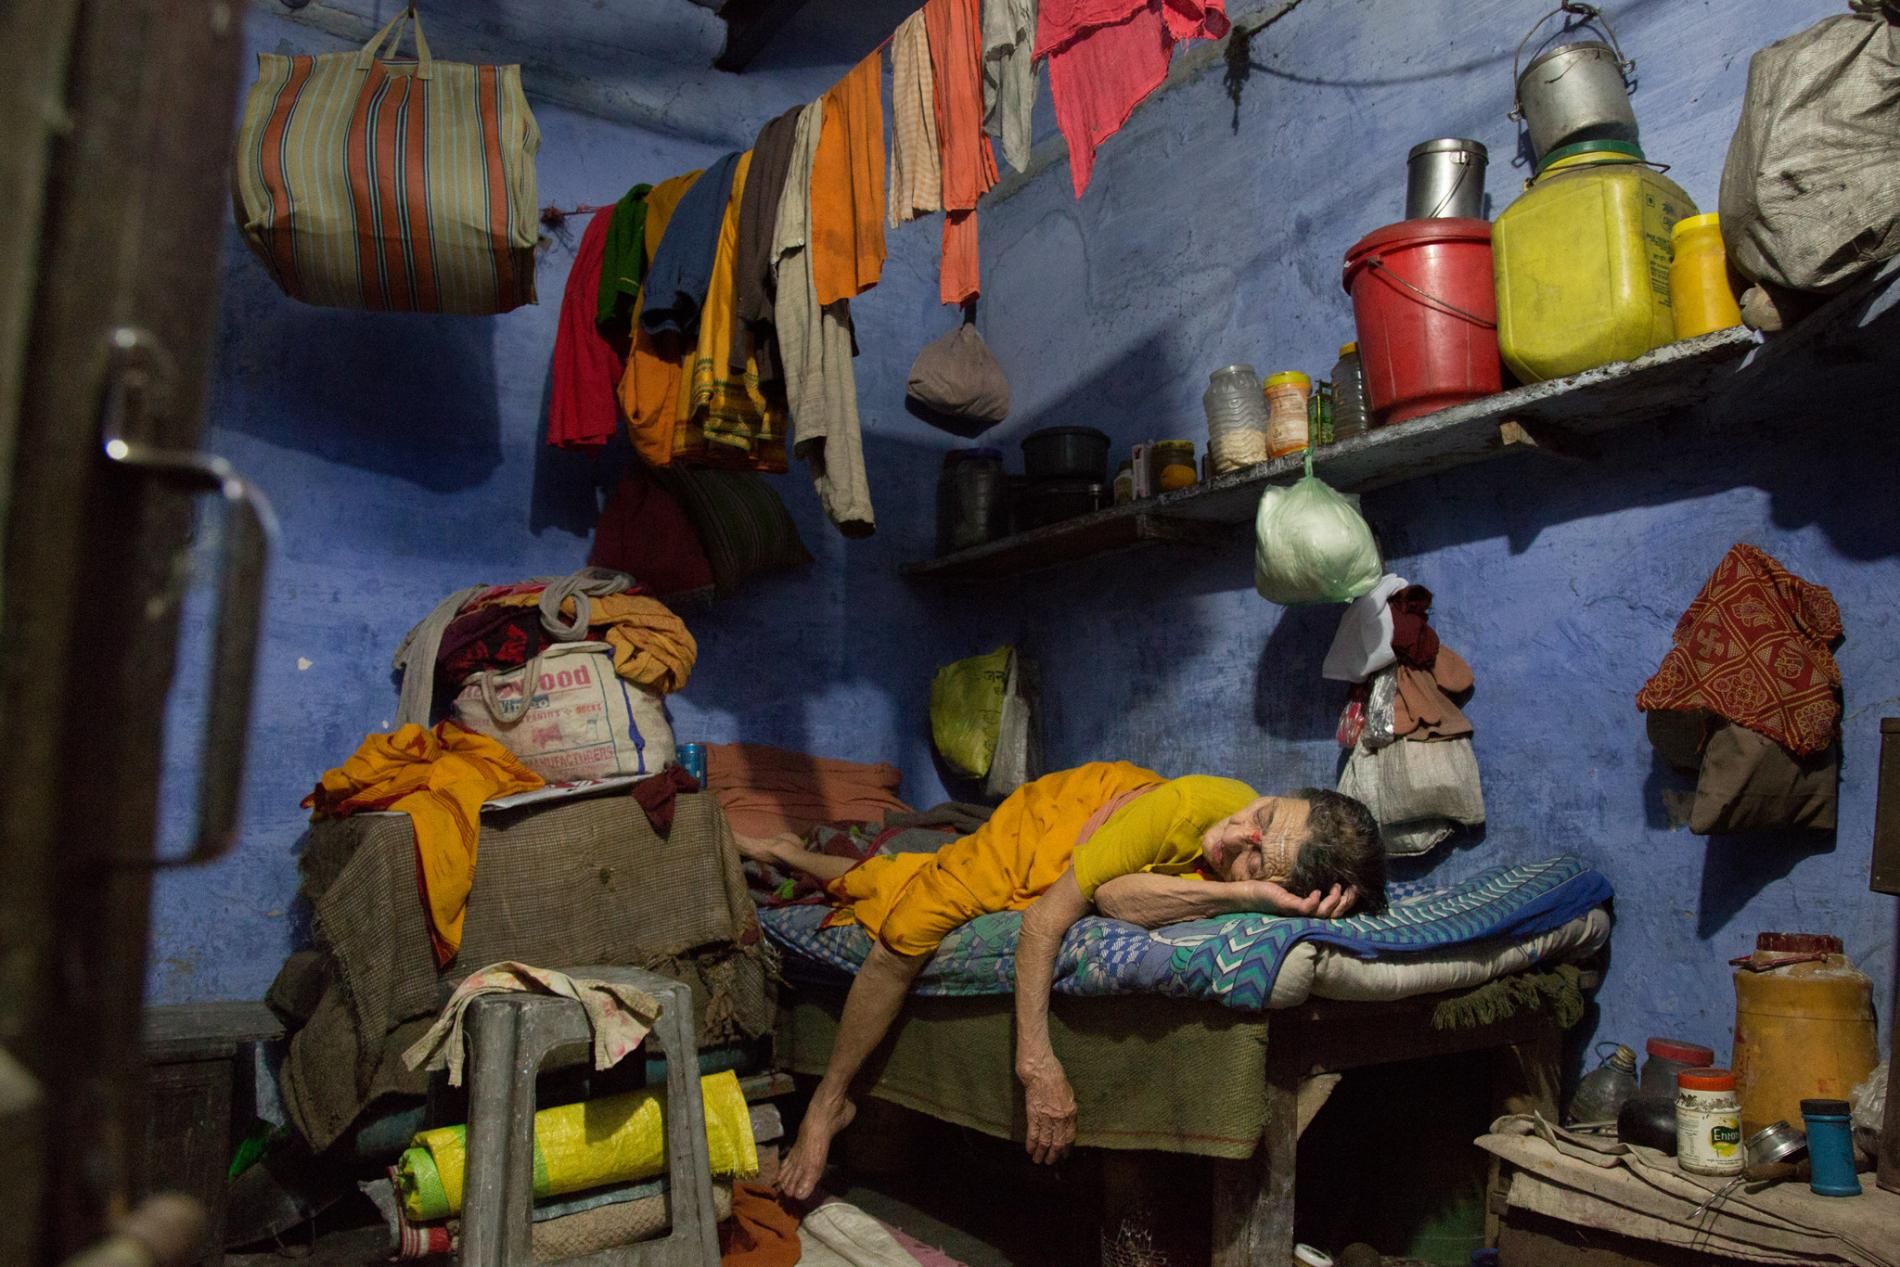 A widow’s belongings surround her in a Varanasi ashram that for generations has taken in women from Nepal. Usually run by religious charities or social-aid groups, widows’ shelters in temple cities offer a roof overhead, a surface to sleep on, and enough food to keep a lean woman alive. Women who outlive their husbands are often seen at home as tainted and burdensome, so shelters also provide an escape from hostile relatives. Image by Amy Tensing. India, 2016